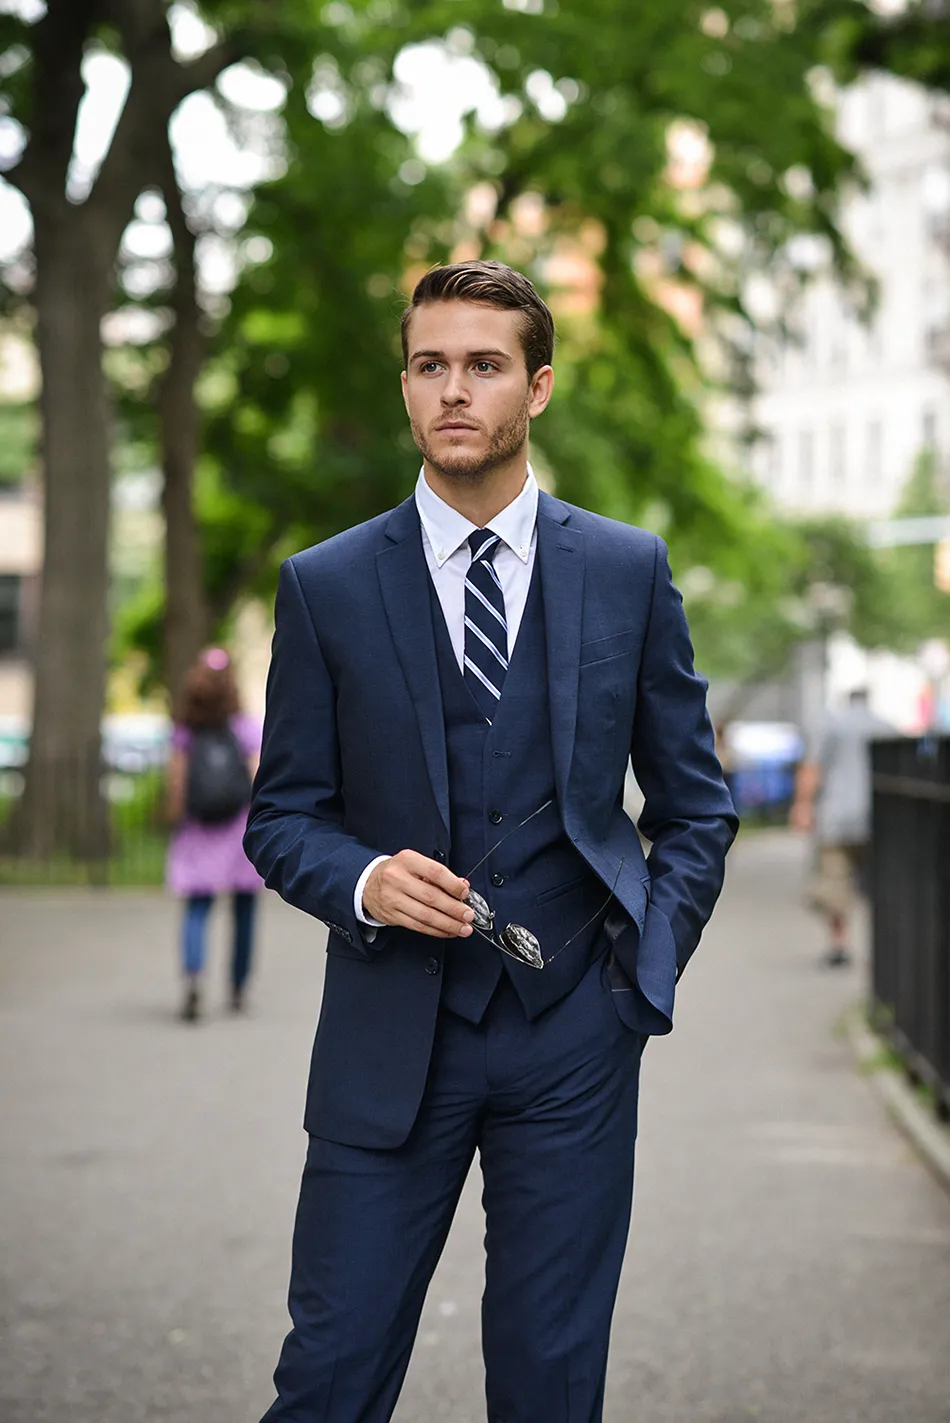 Navy Blue Handsome Wedding Tuxedos Slim Fit Suits For Men Groomsmen Suit Three Pieces Cheap Prom Formal SuitsJacket+Vest+Pants